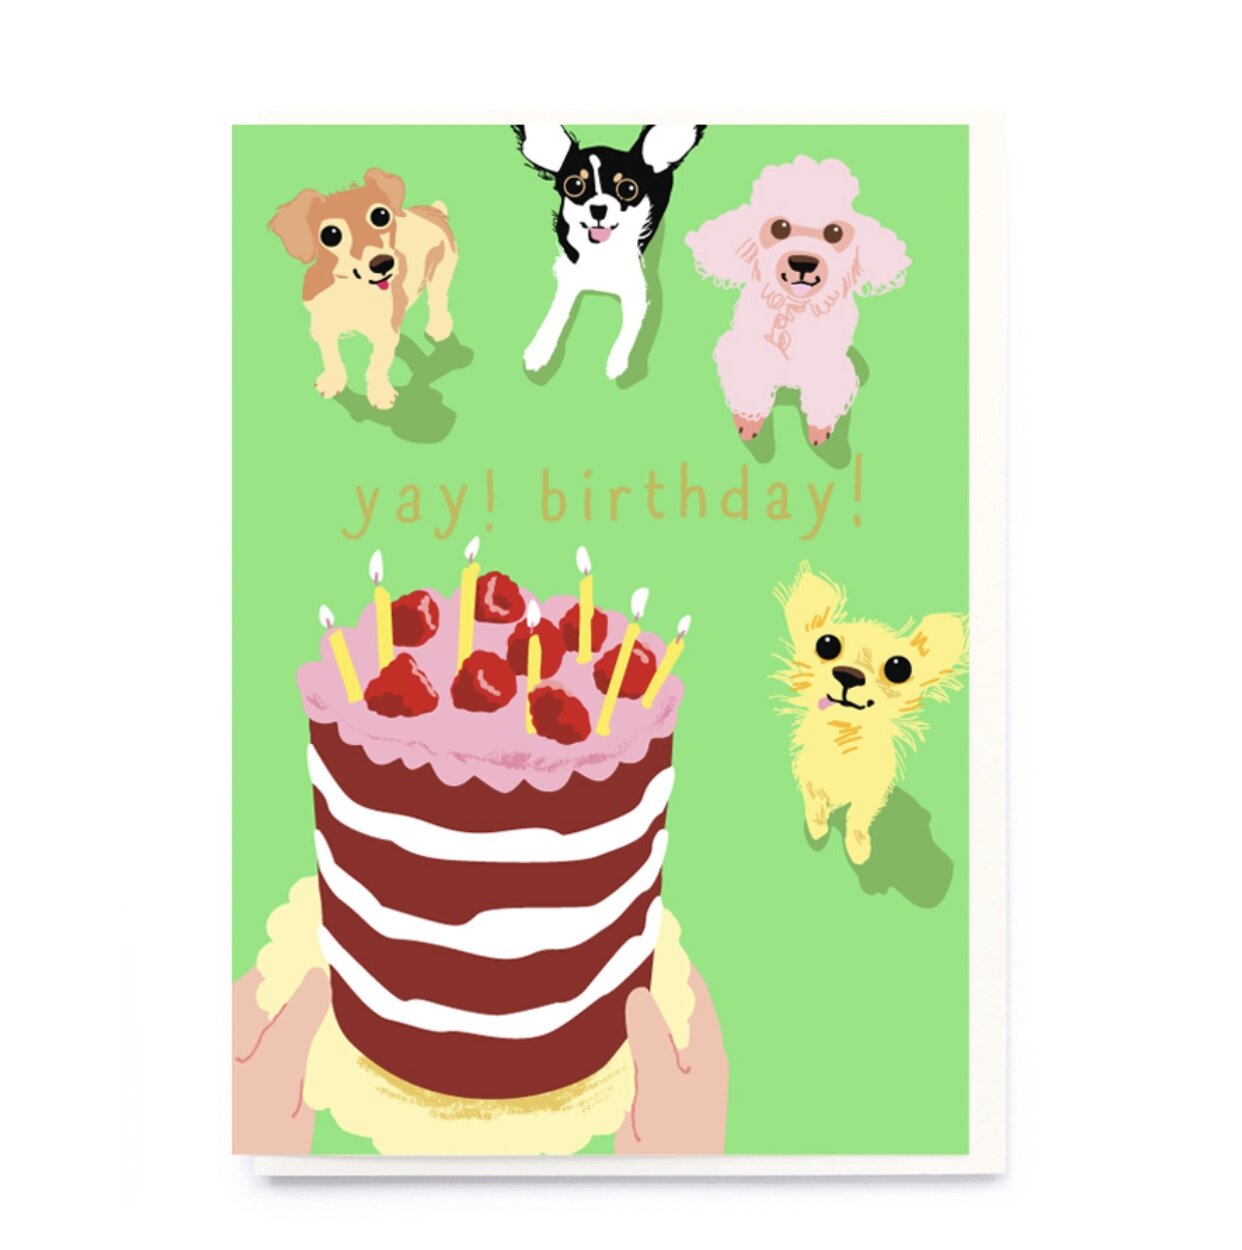 YAY! BIRTHDAY (CAKE & DOGS NEON) | CARD BY NOI